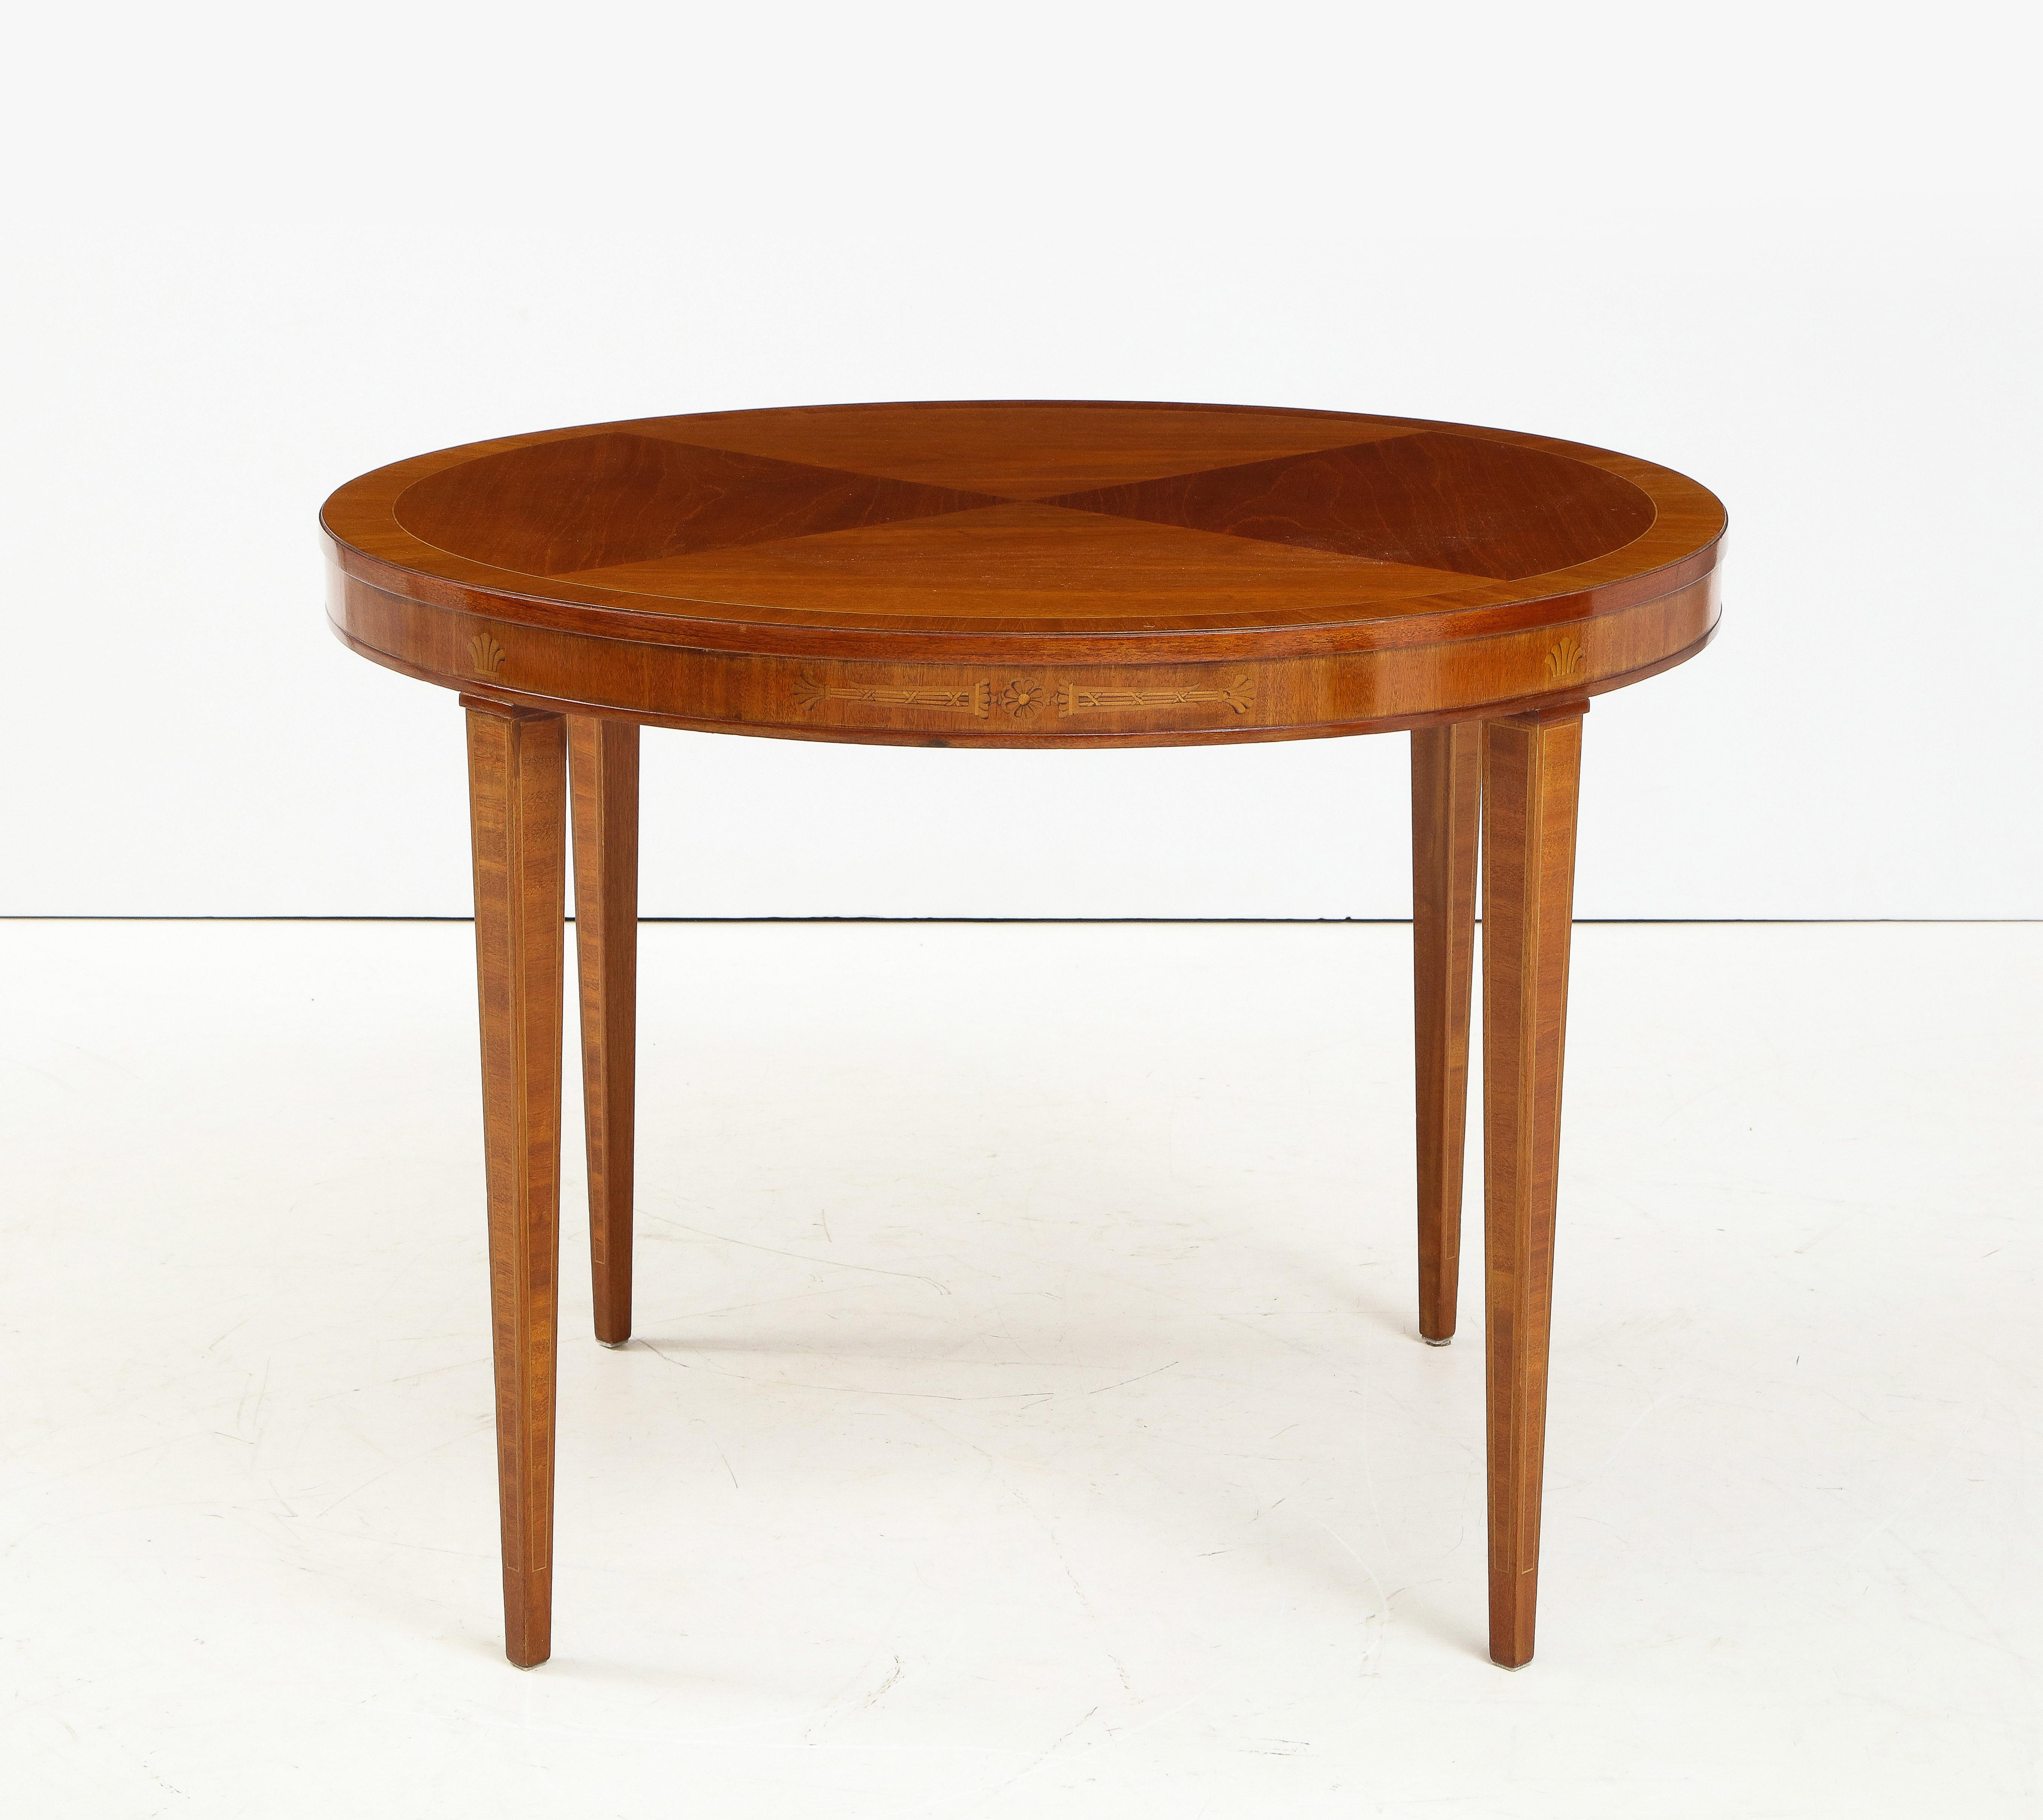 A Swedish Grace fruitwood inlaid mahogany table, Circa 1940s, the circular top with four pie shaped veneers and a cross banded edge. The frieze with classical inspired fruitwood inlays, raised on square tapered legs.

 